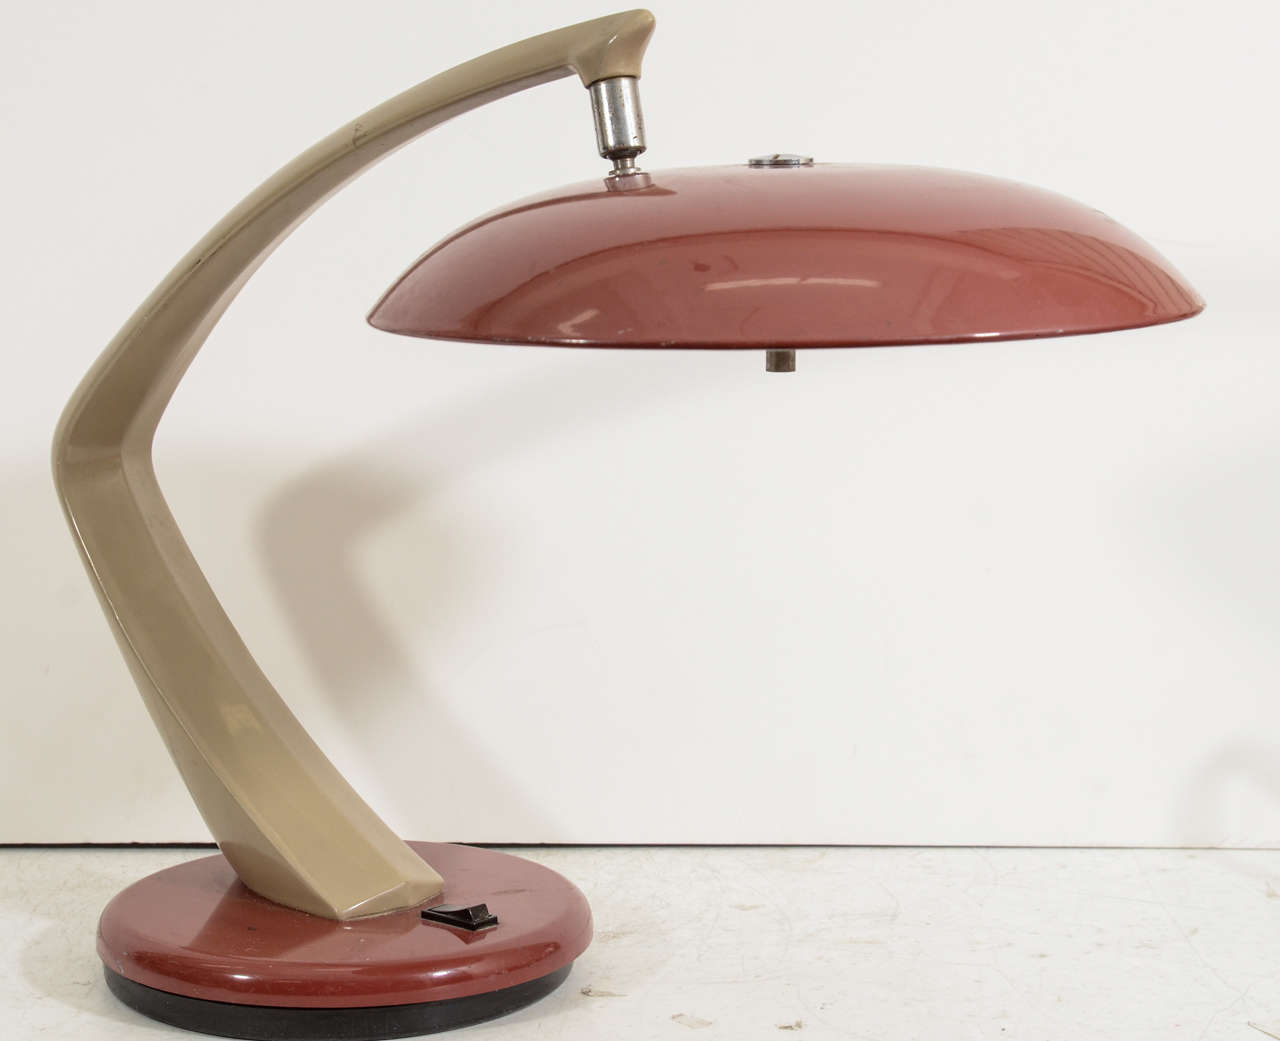 A vintage desk lamp by Fase, produced circa 1970s, with red enameled shade and beige arm. The piece is in good vintage condition, with age appropriate wear, including minor scratches and scuffs; the glass diffuser is missing.